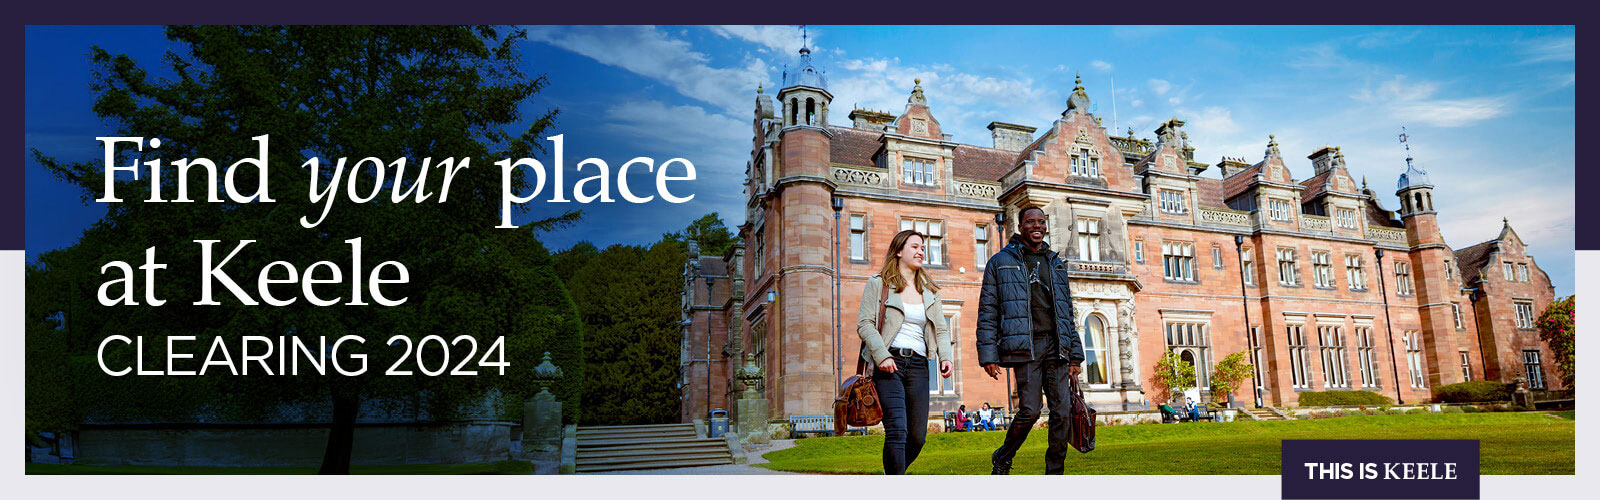 Find your place at Keele in 2024. Two students are walking in front of Keele Hall. 